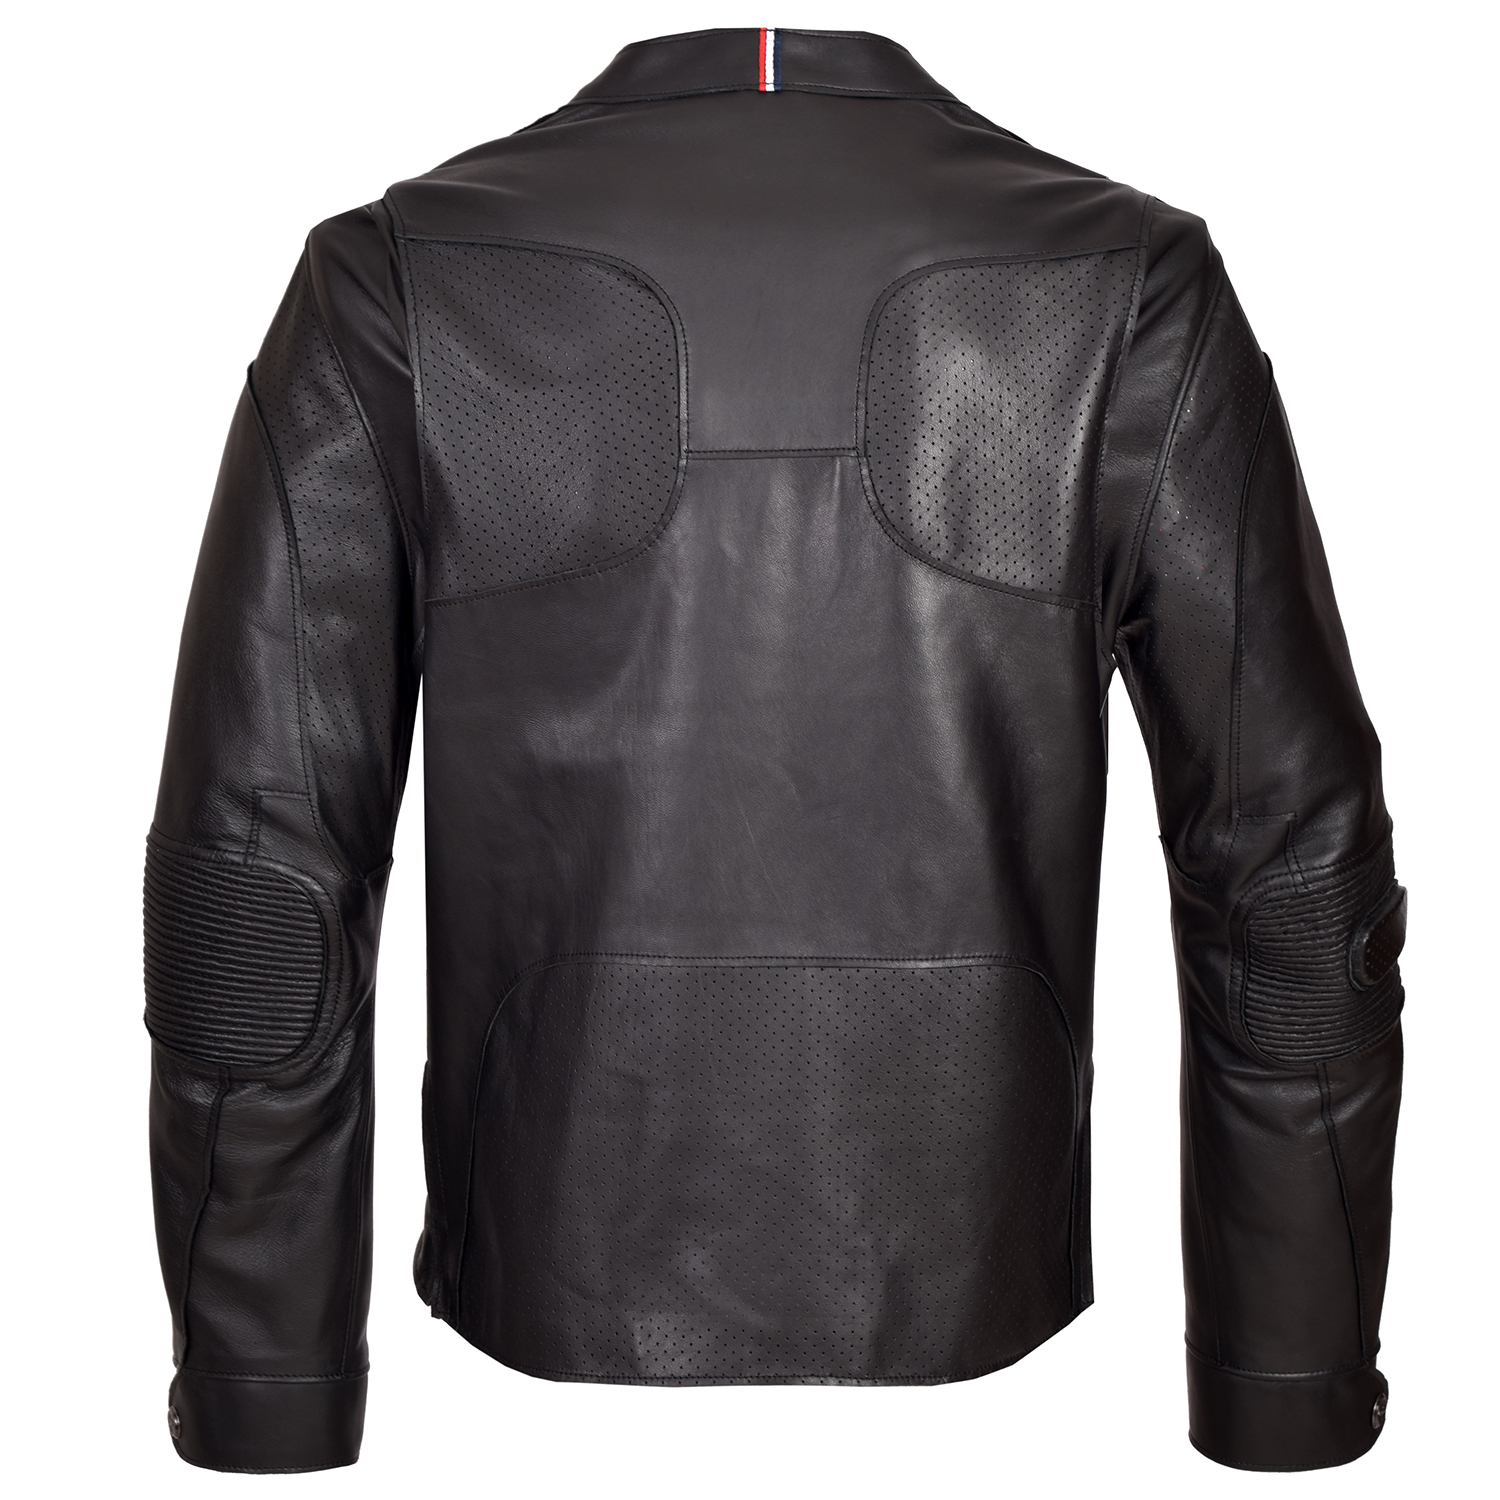 Shop — Ford Mustang Jackets